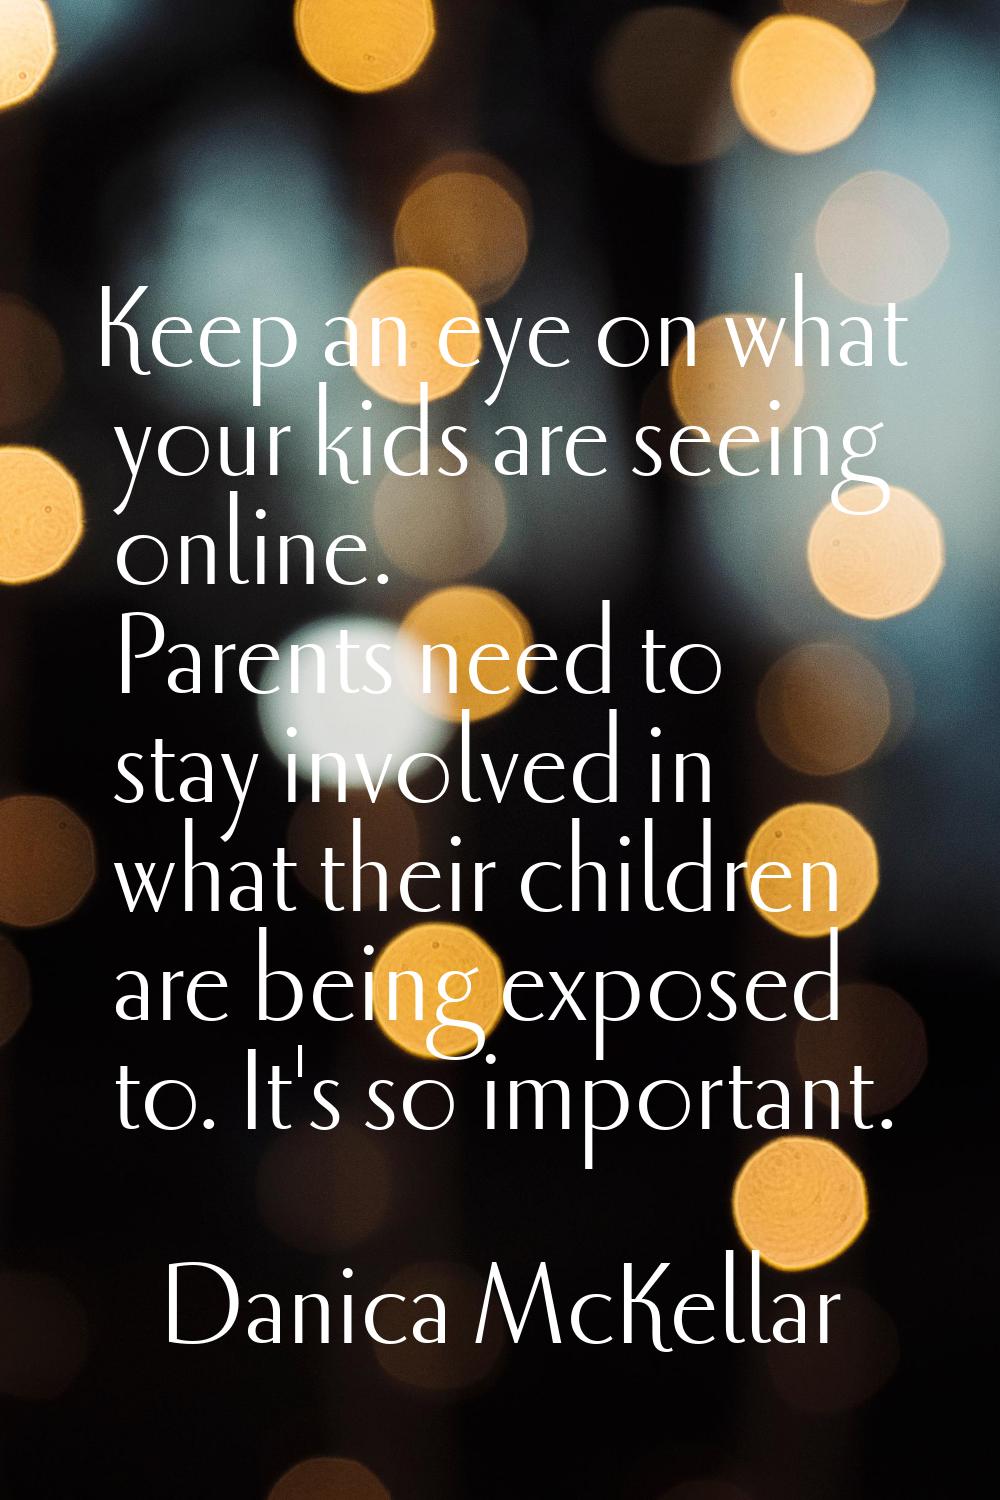 Keep an eye on what your kids are seeing online. Parents need to stay involved in what their childr